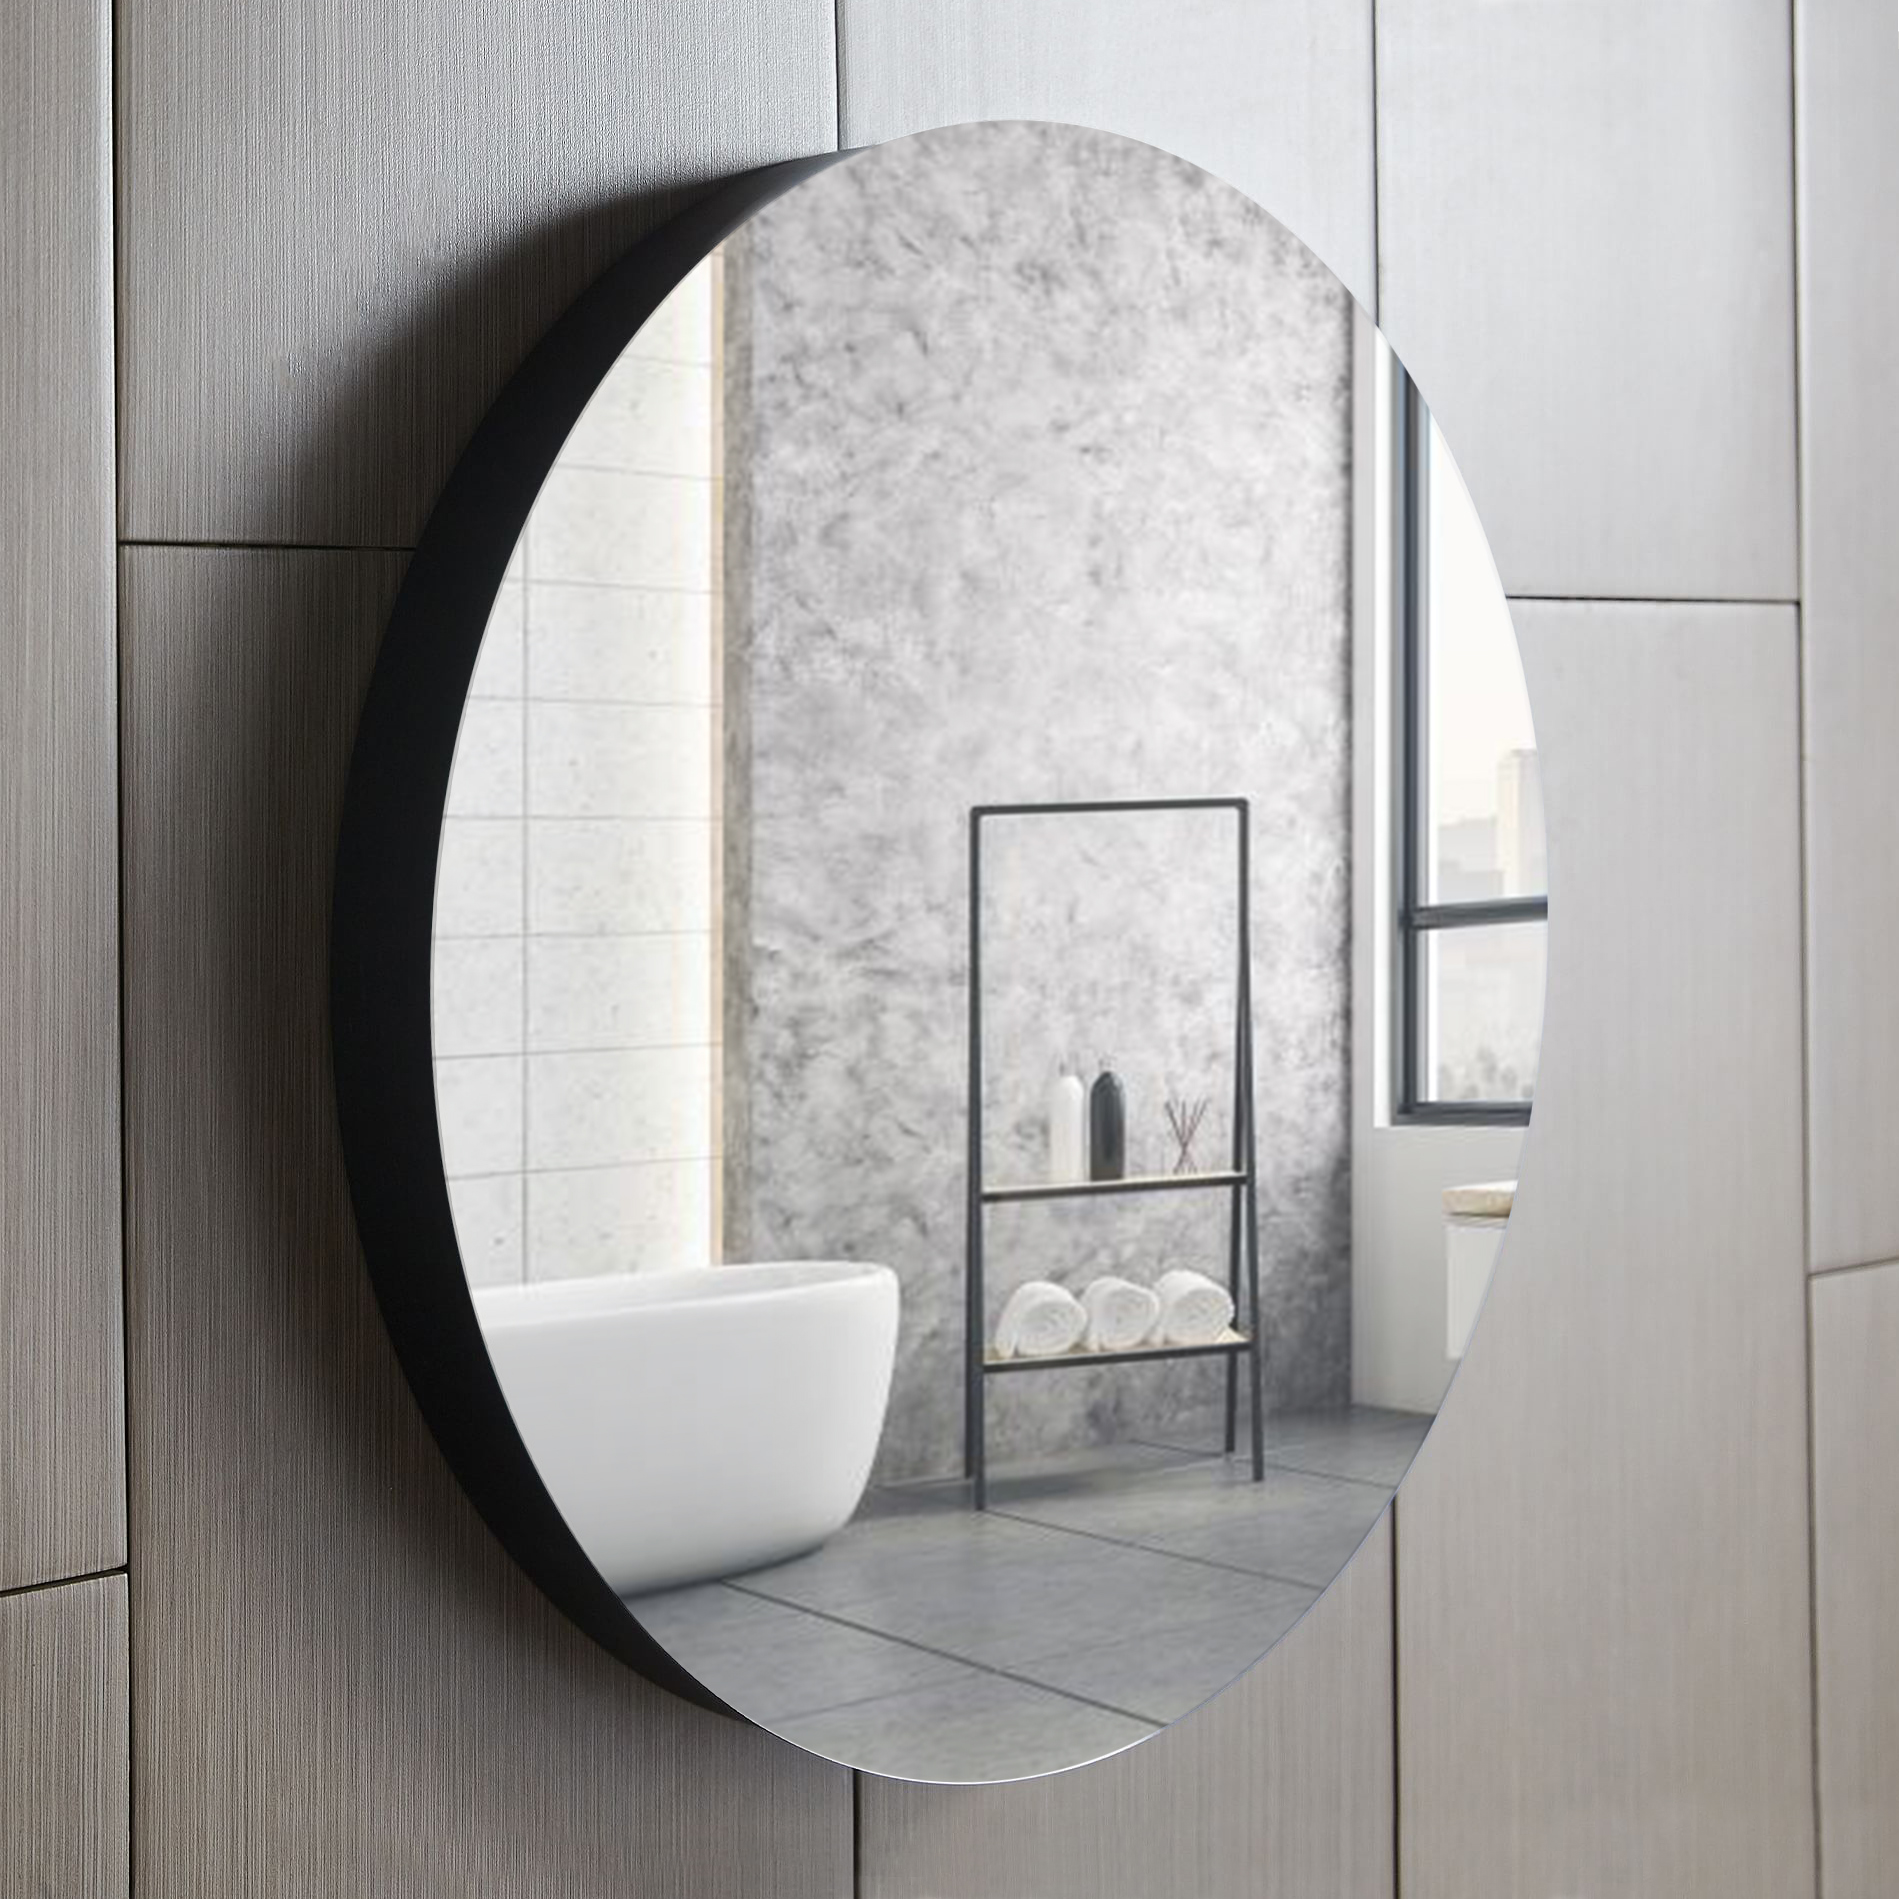 Ortonbath Large Round Wall Mirror Black Circle Mirror 30 Inch, Stainless  Steel Metal Frame Wall Mounted for Bathroom Bedroom Vanity Living Room  Entryway - China Mirrors Decor Wall, LED Mirror